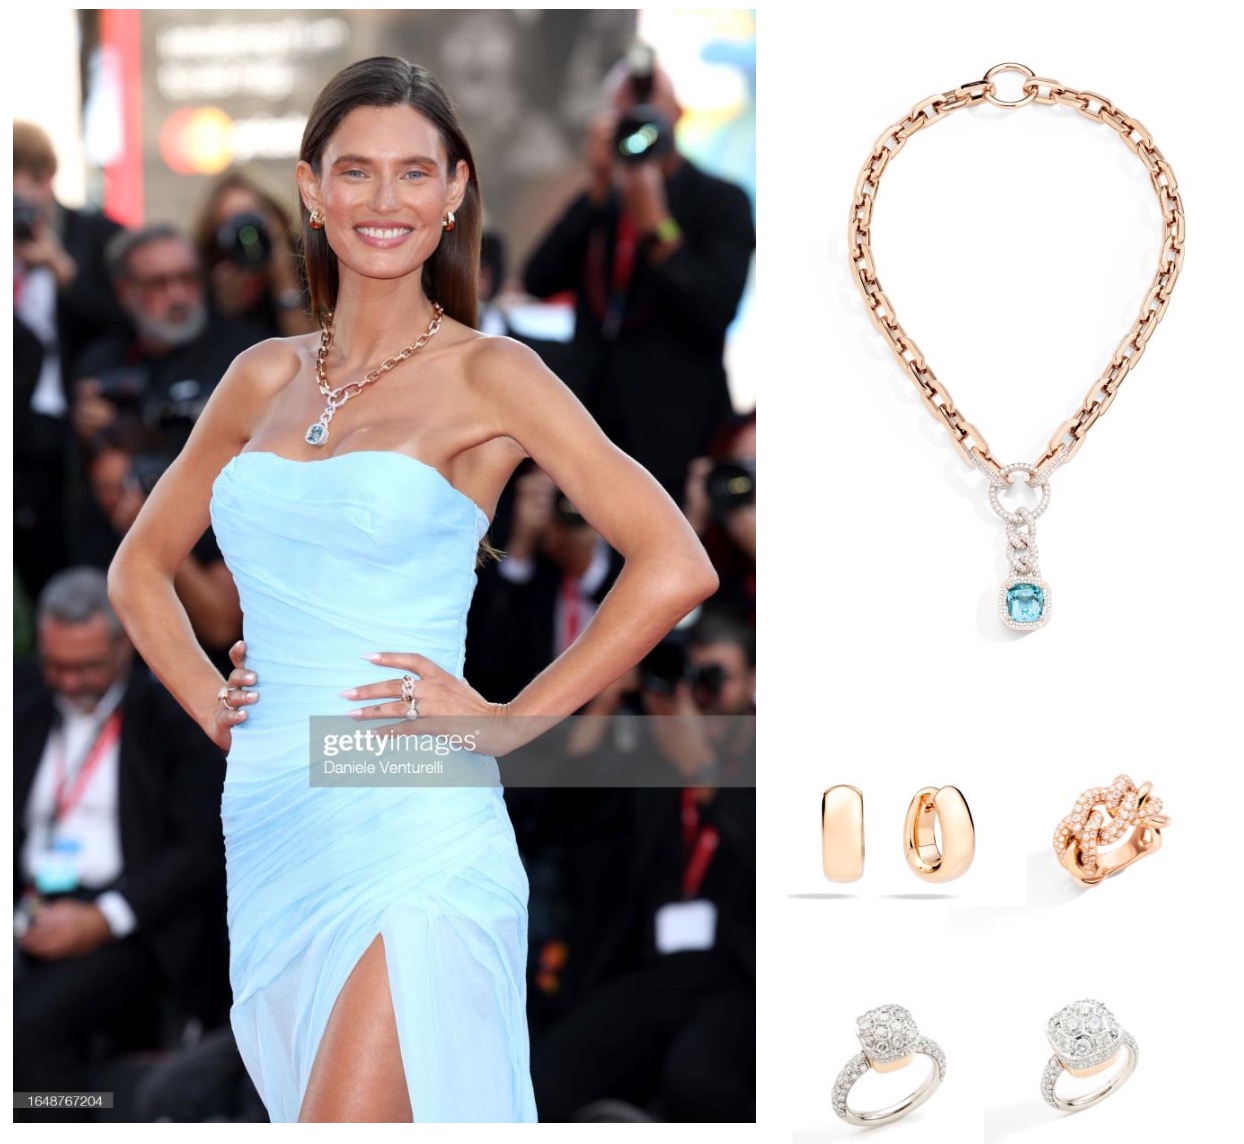 A person in a blue dress and jewelry Description automatically generated